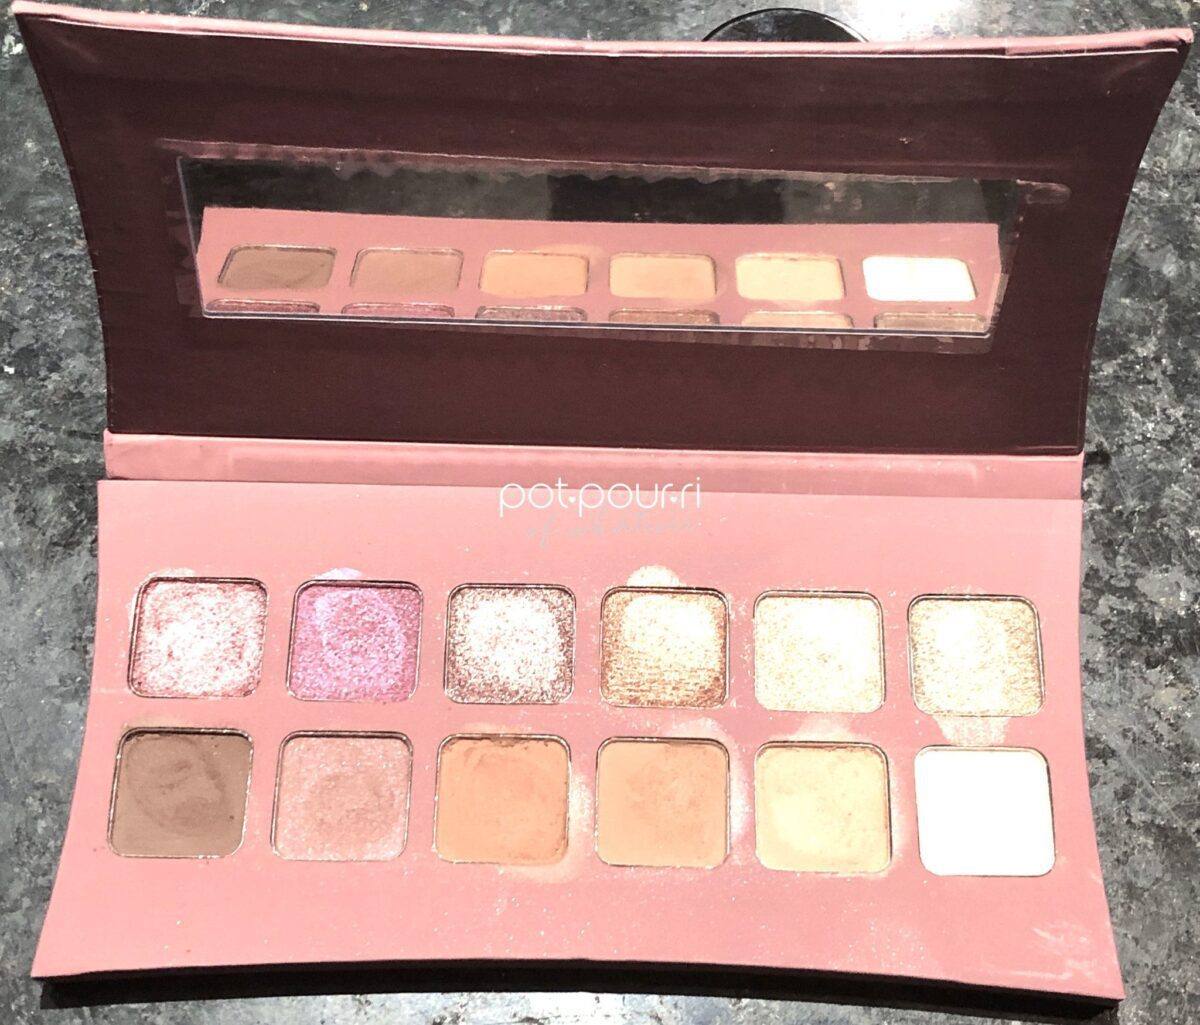 INSIDE THE UNVEILED ARTISTRY PALETTE ARE 6 METALLIC SHADES ACROSS THE TOP ROW,, AND 6 MATTE SHADES ACROSS THE BOTTOM ROW, AND A RECTANGULAR MIRROR